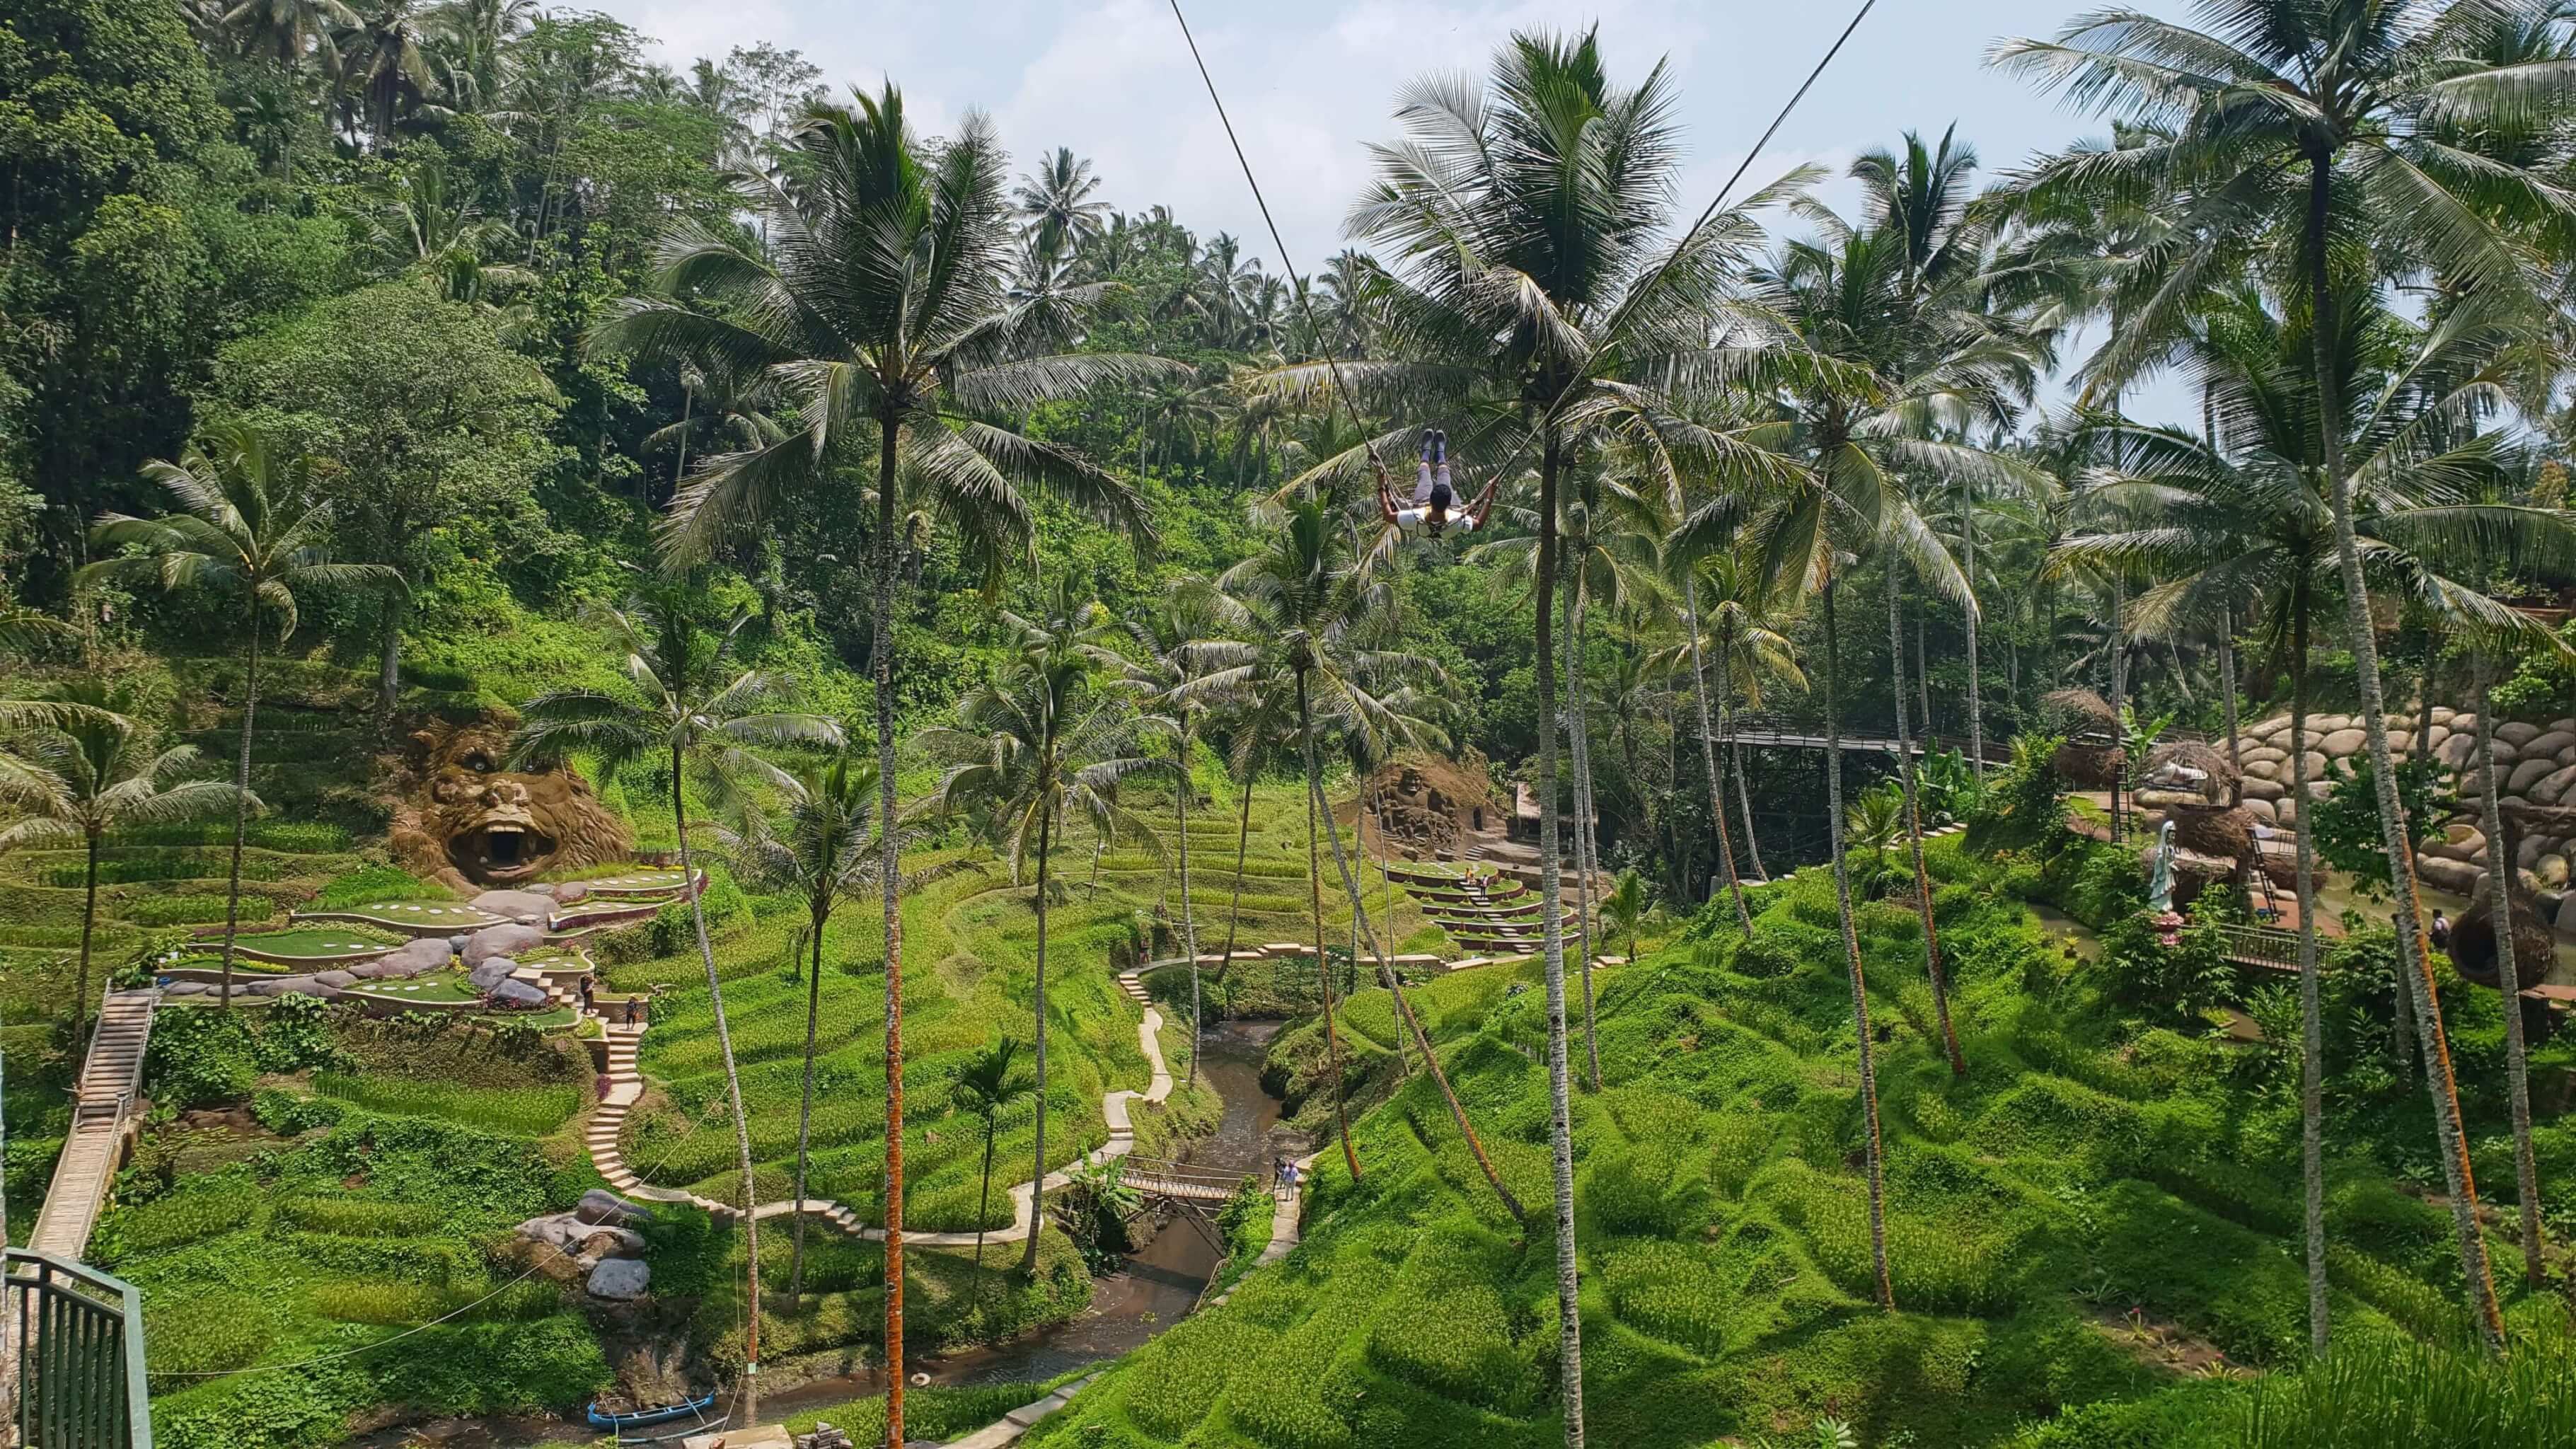 At Uma Pakel you get to do the famous Bali Swing at an affordable price